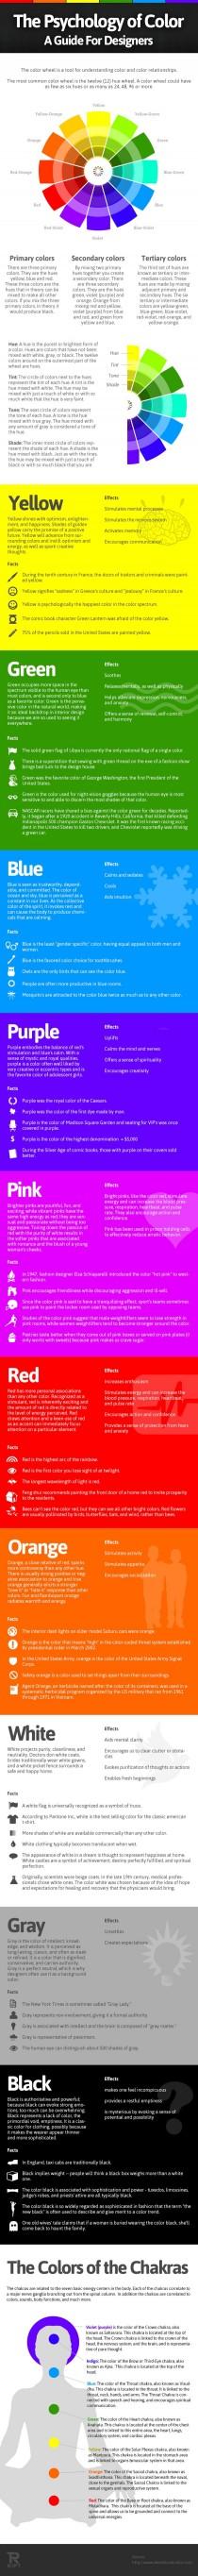 wedding photo - A Color Selection Guide For Designers - Infographic